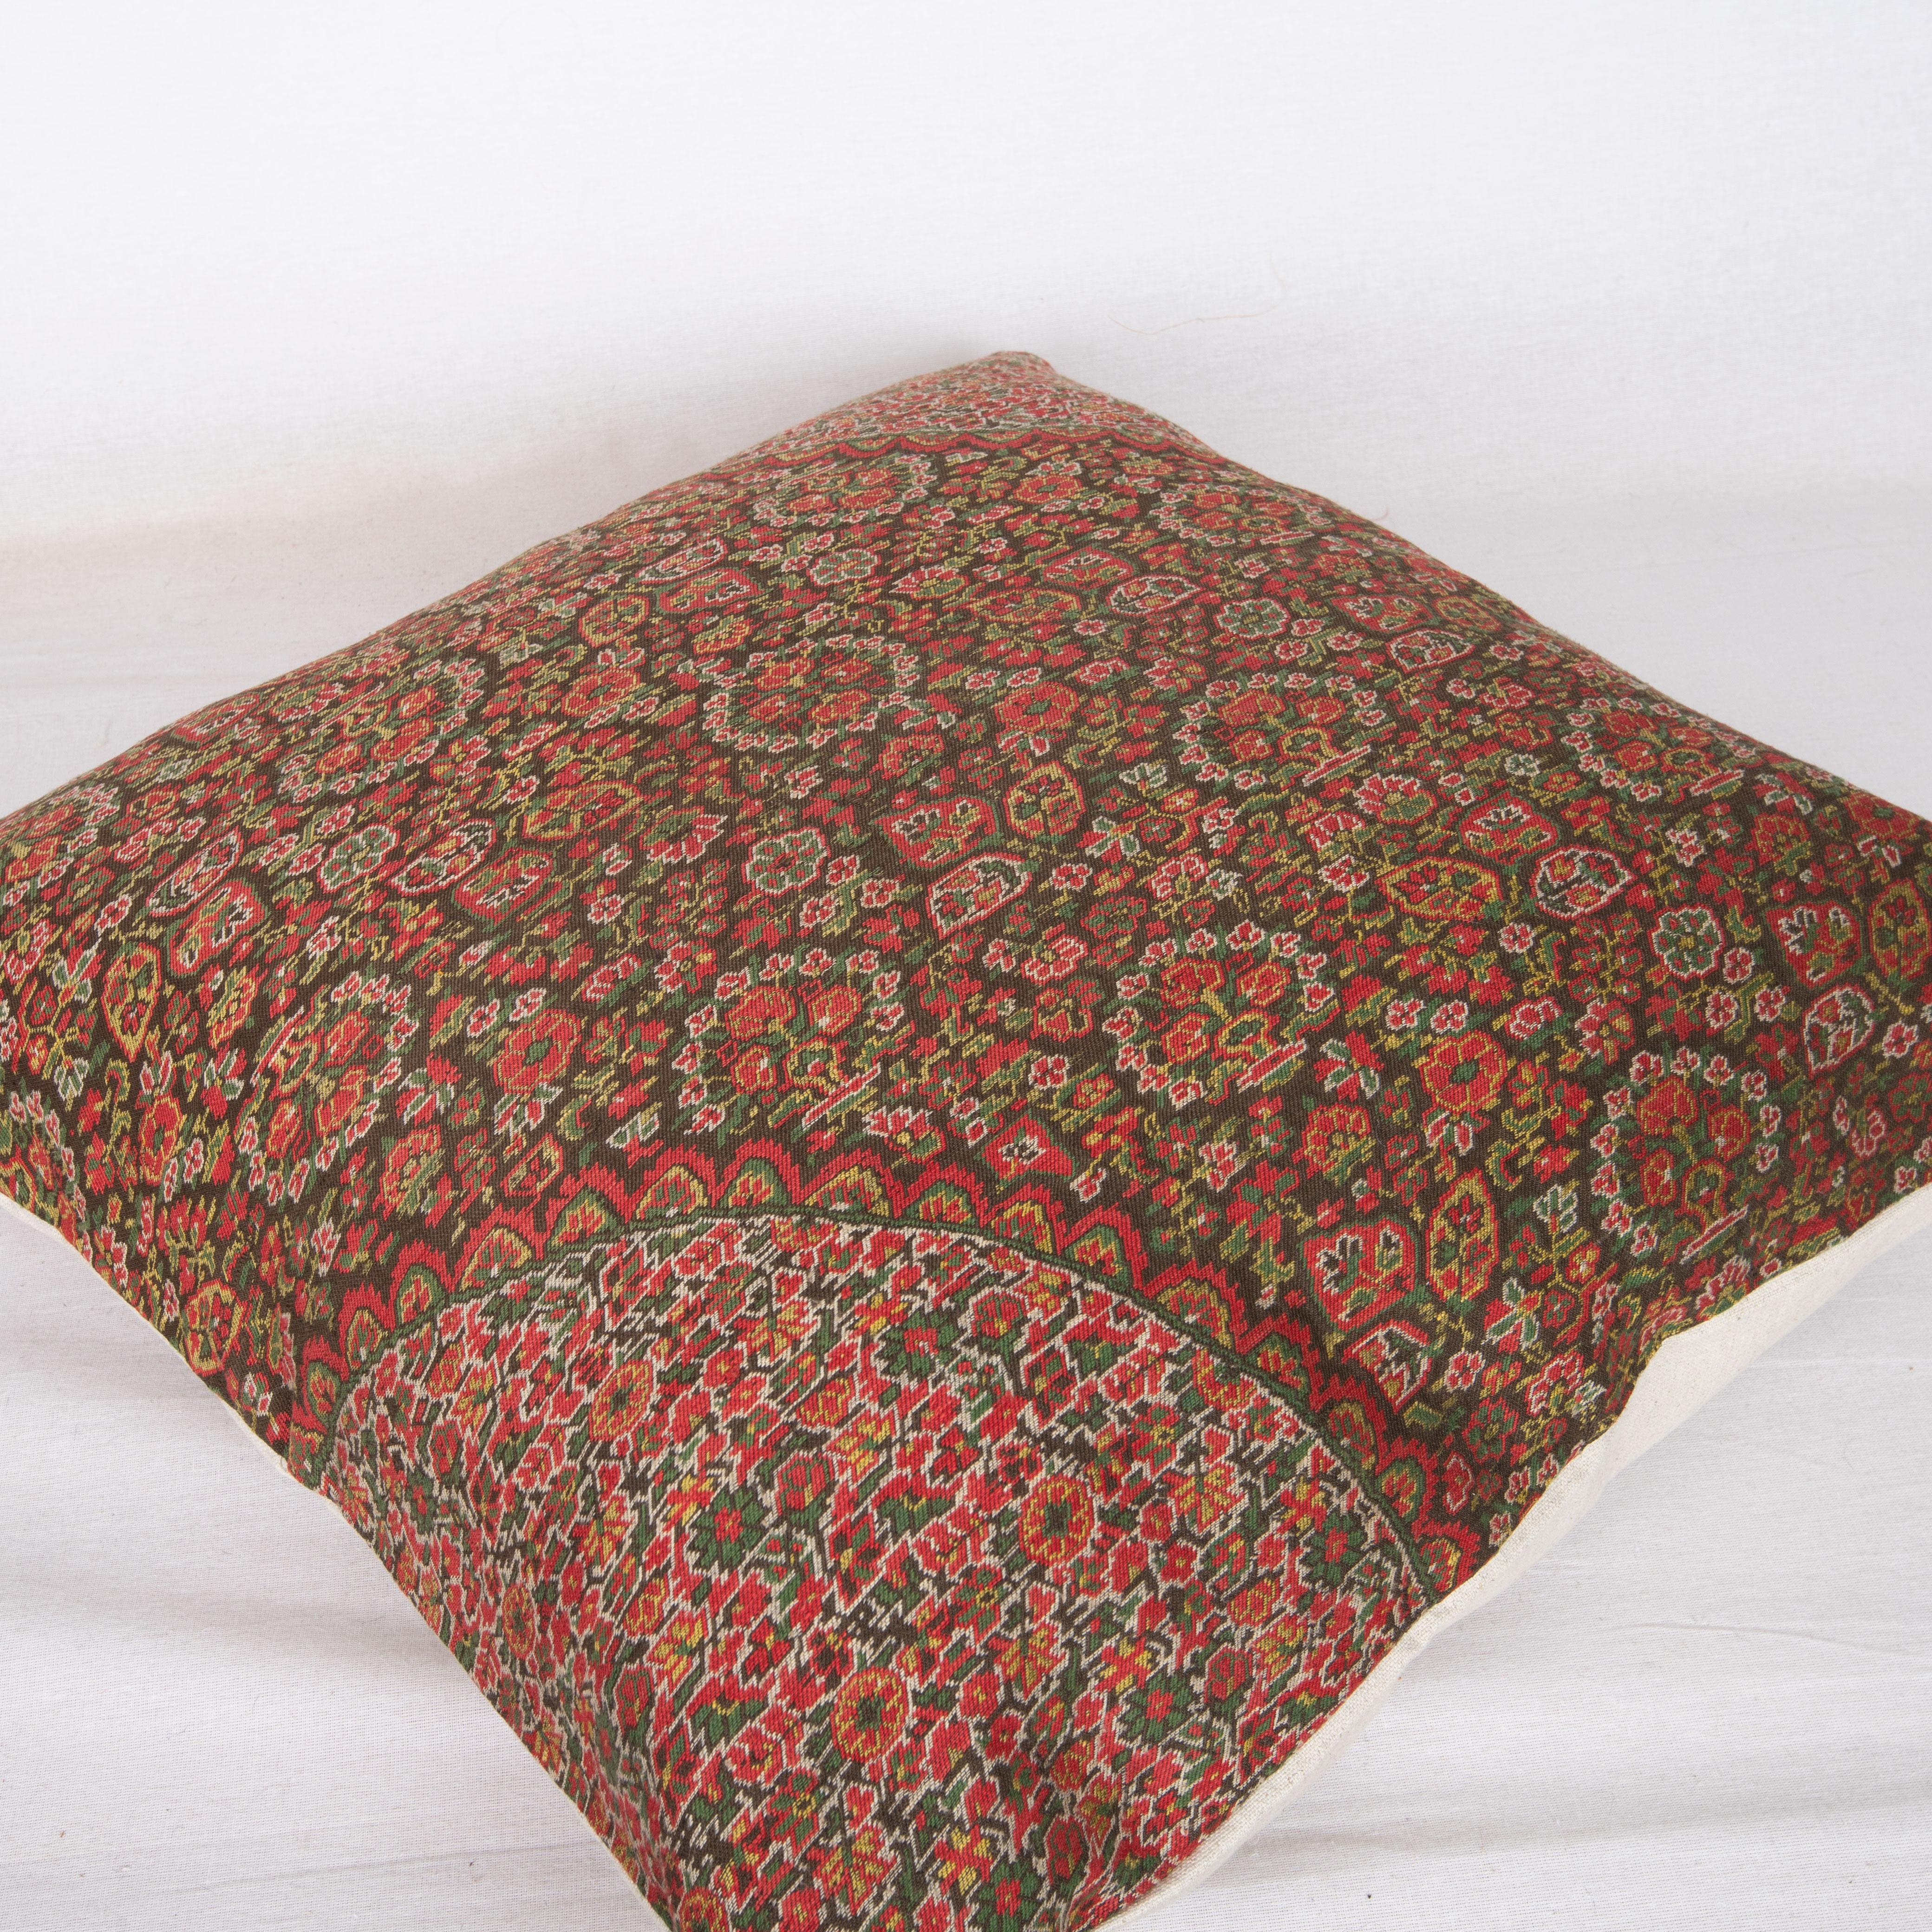 20th Century Antique Pillow Cover Made from a European Wool Paisley Shawl, L 19th/ E.20th C. For Sale